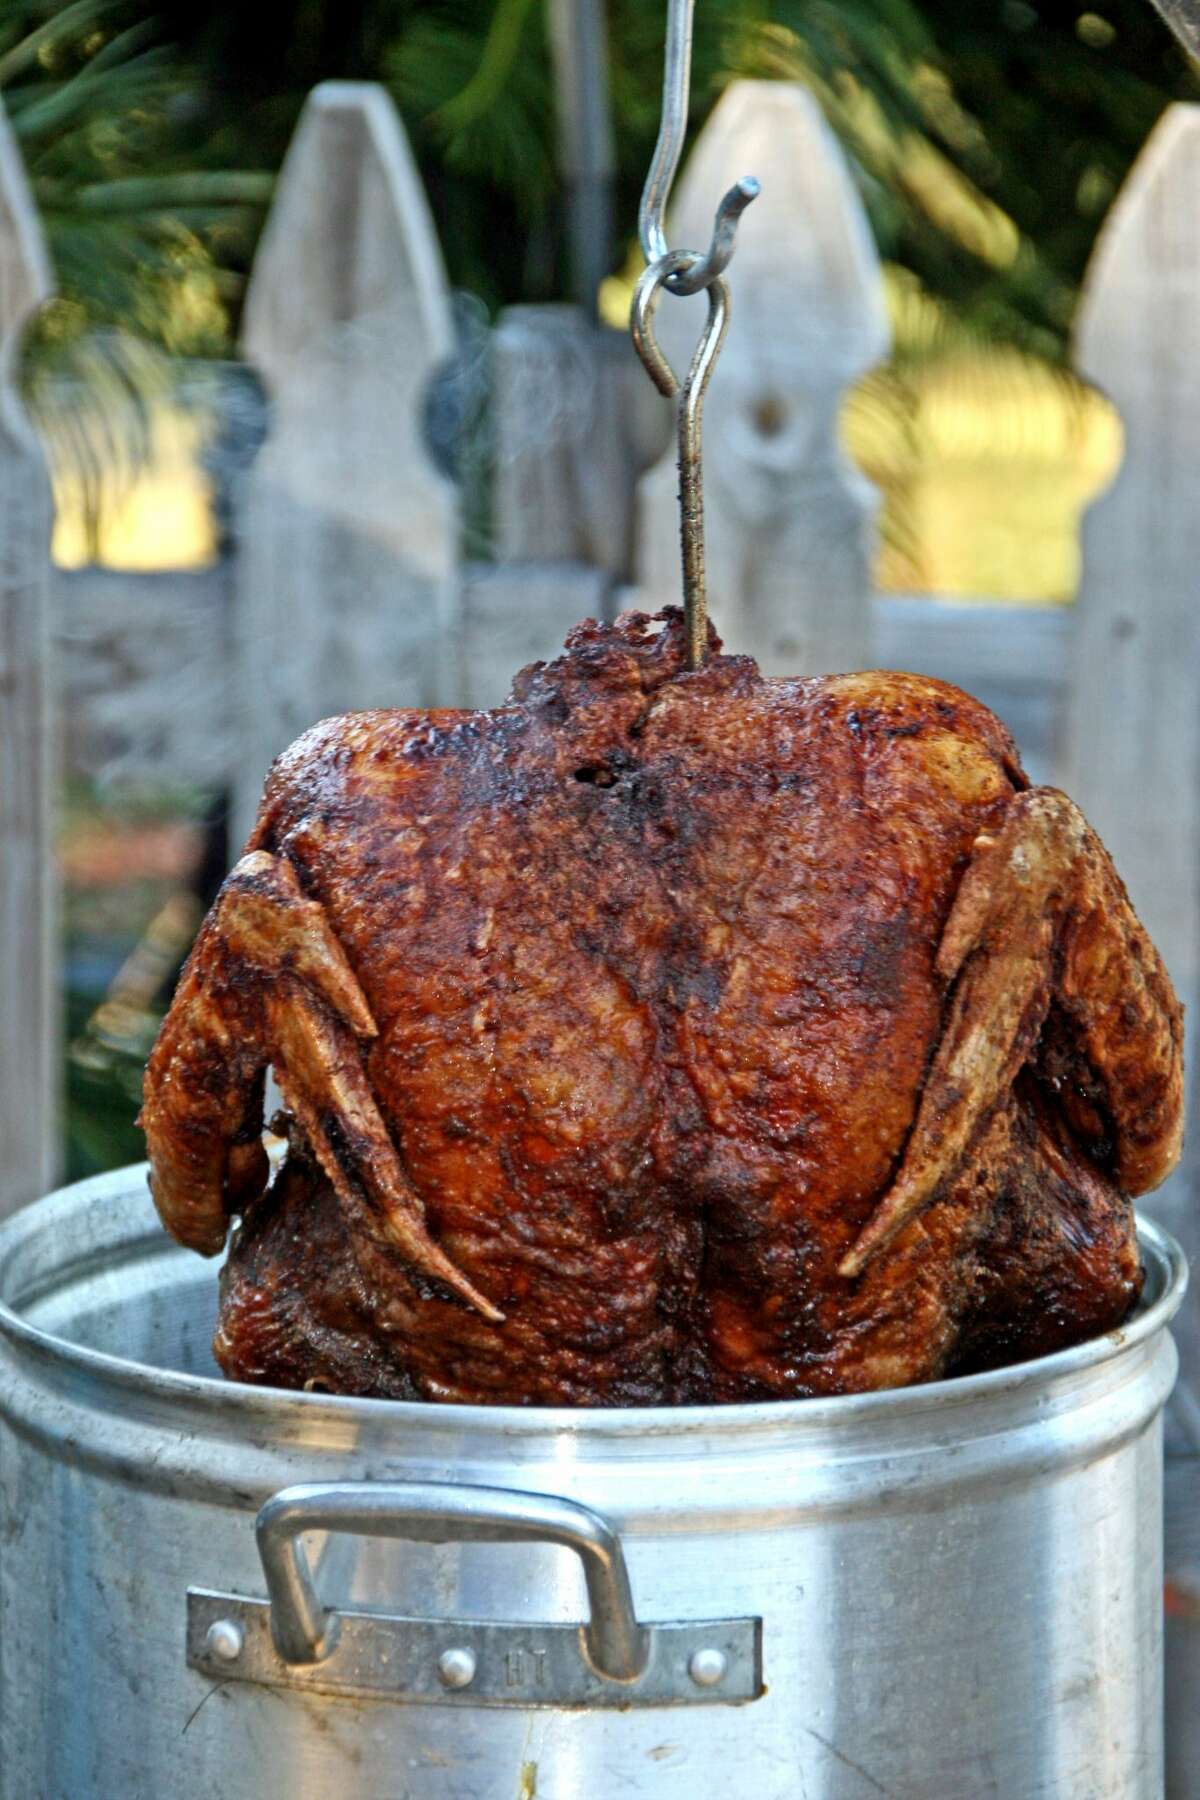 Where to buy a fried turkey for Thanksgiving in San Antonio